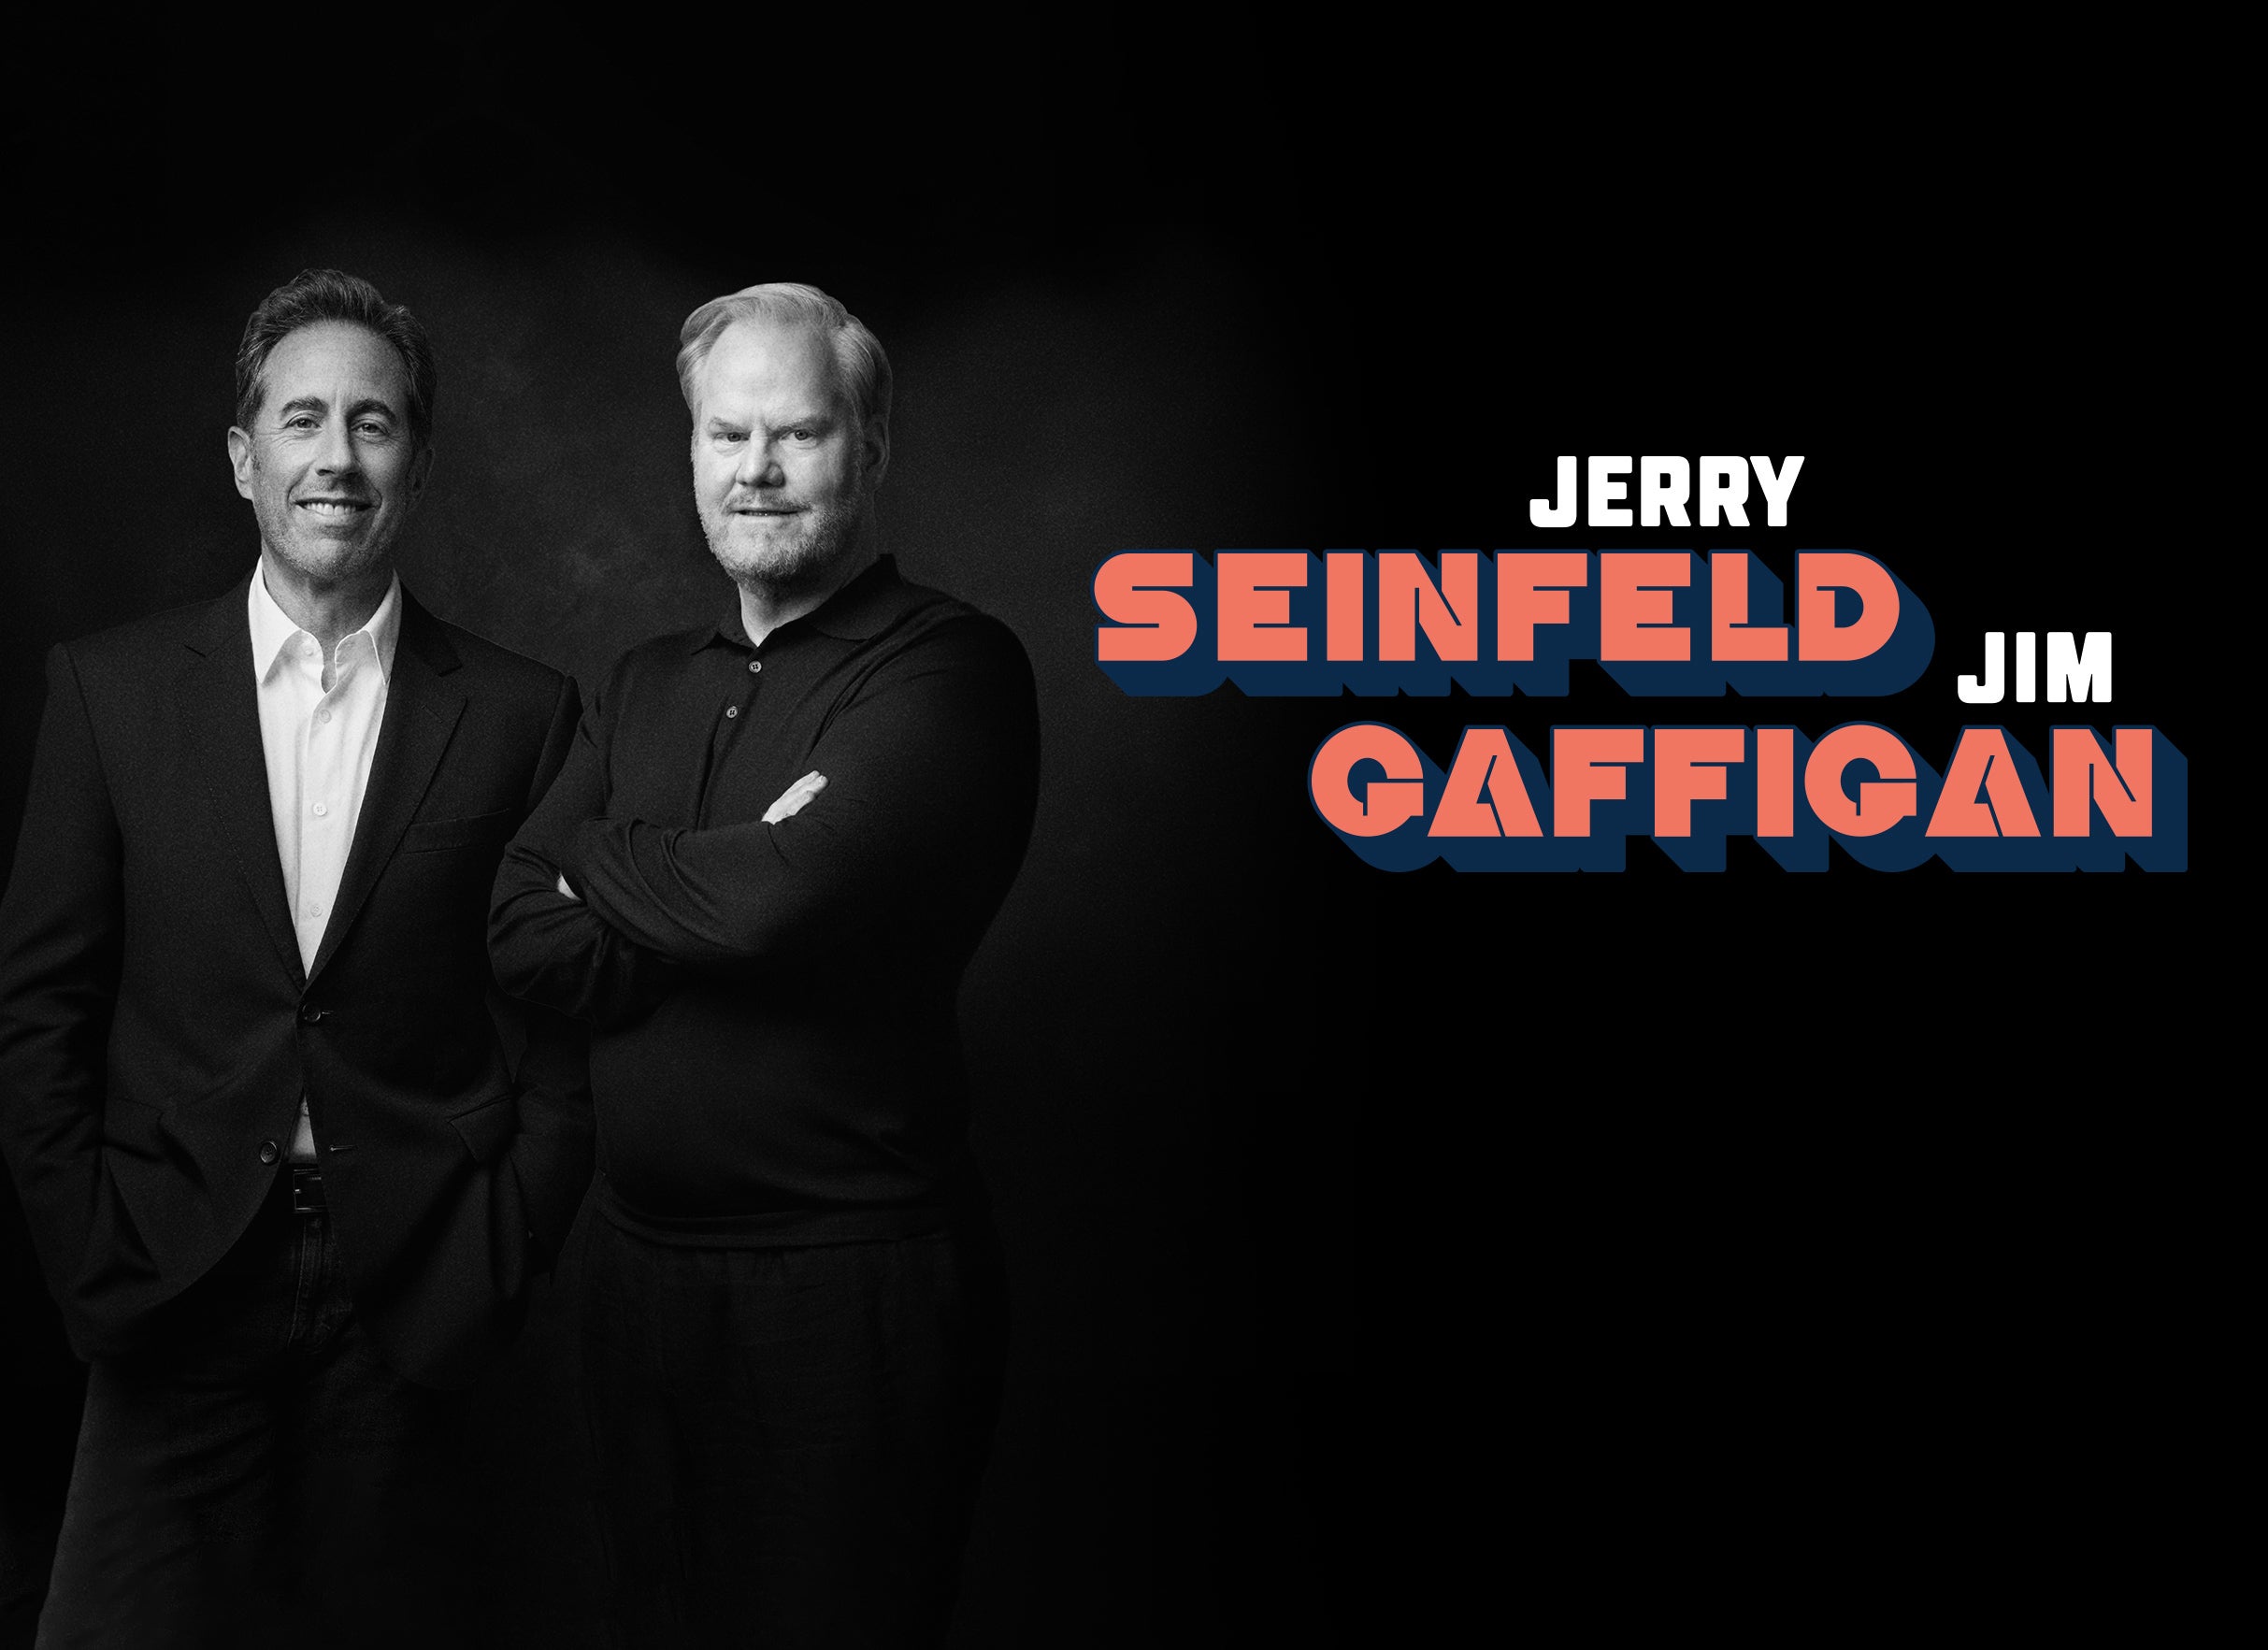 Jerry Seinfeld And Jim Gaffigan pre-sale code for advance tickets in St Louis